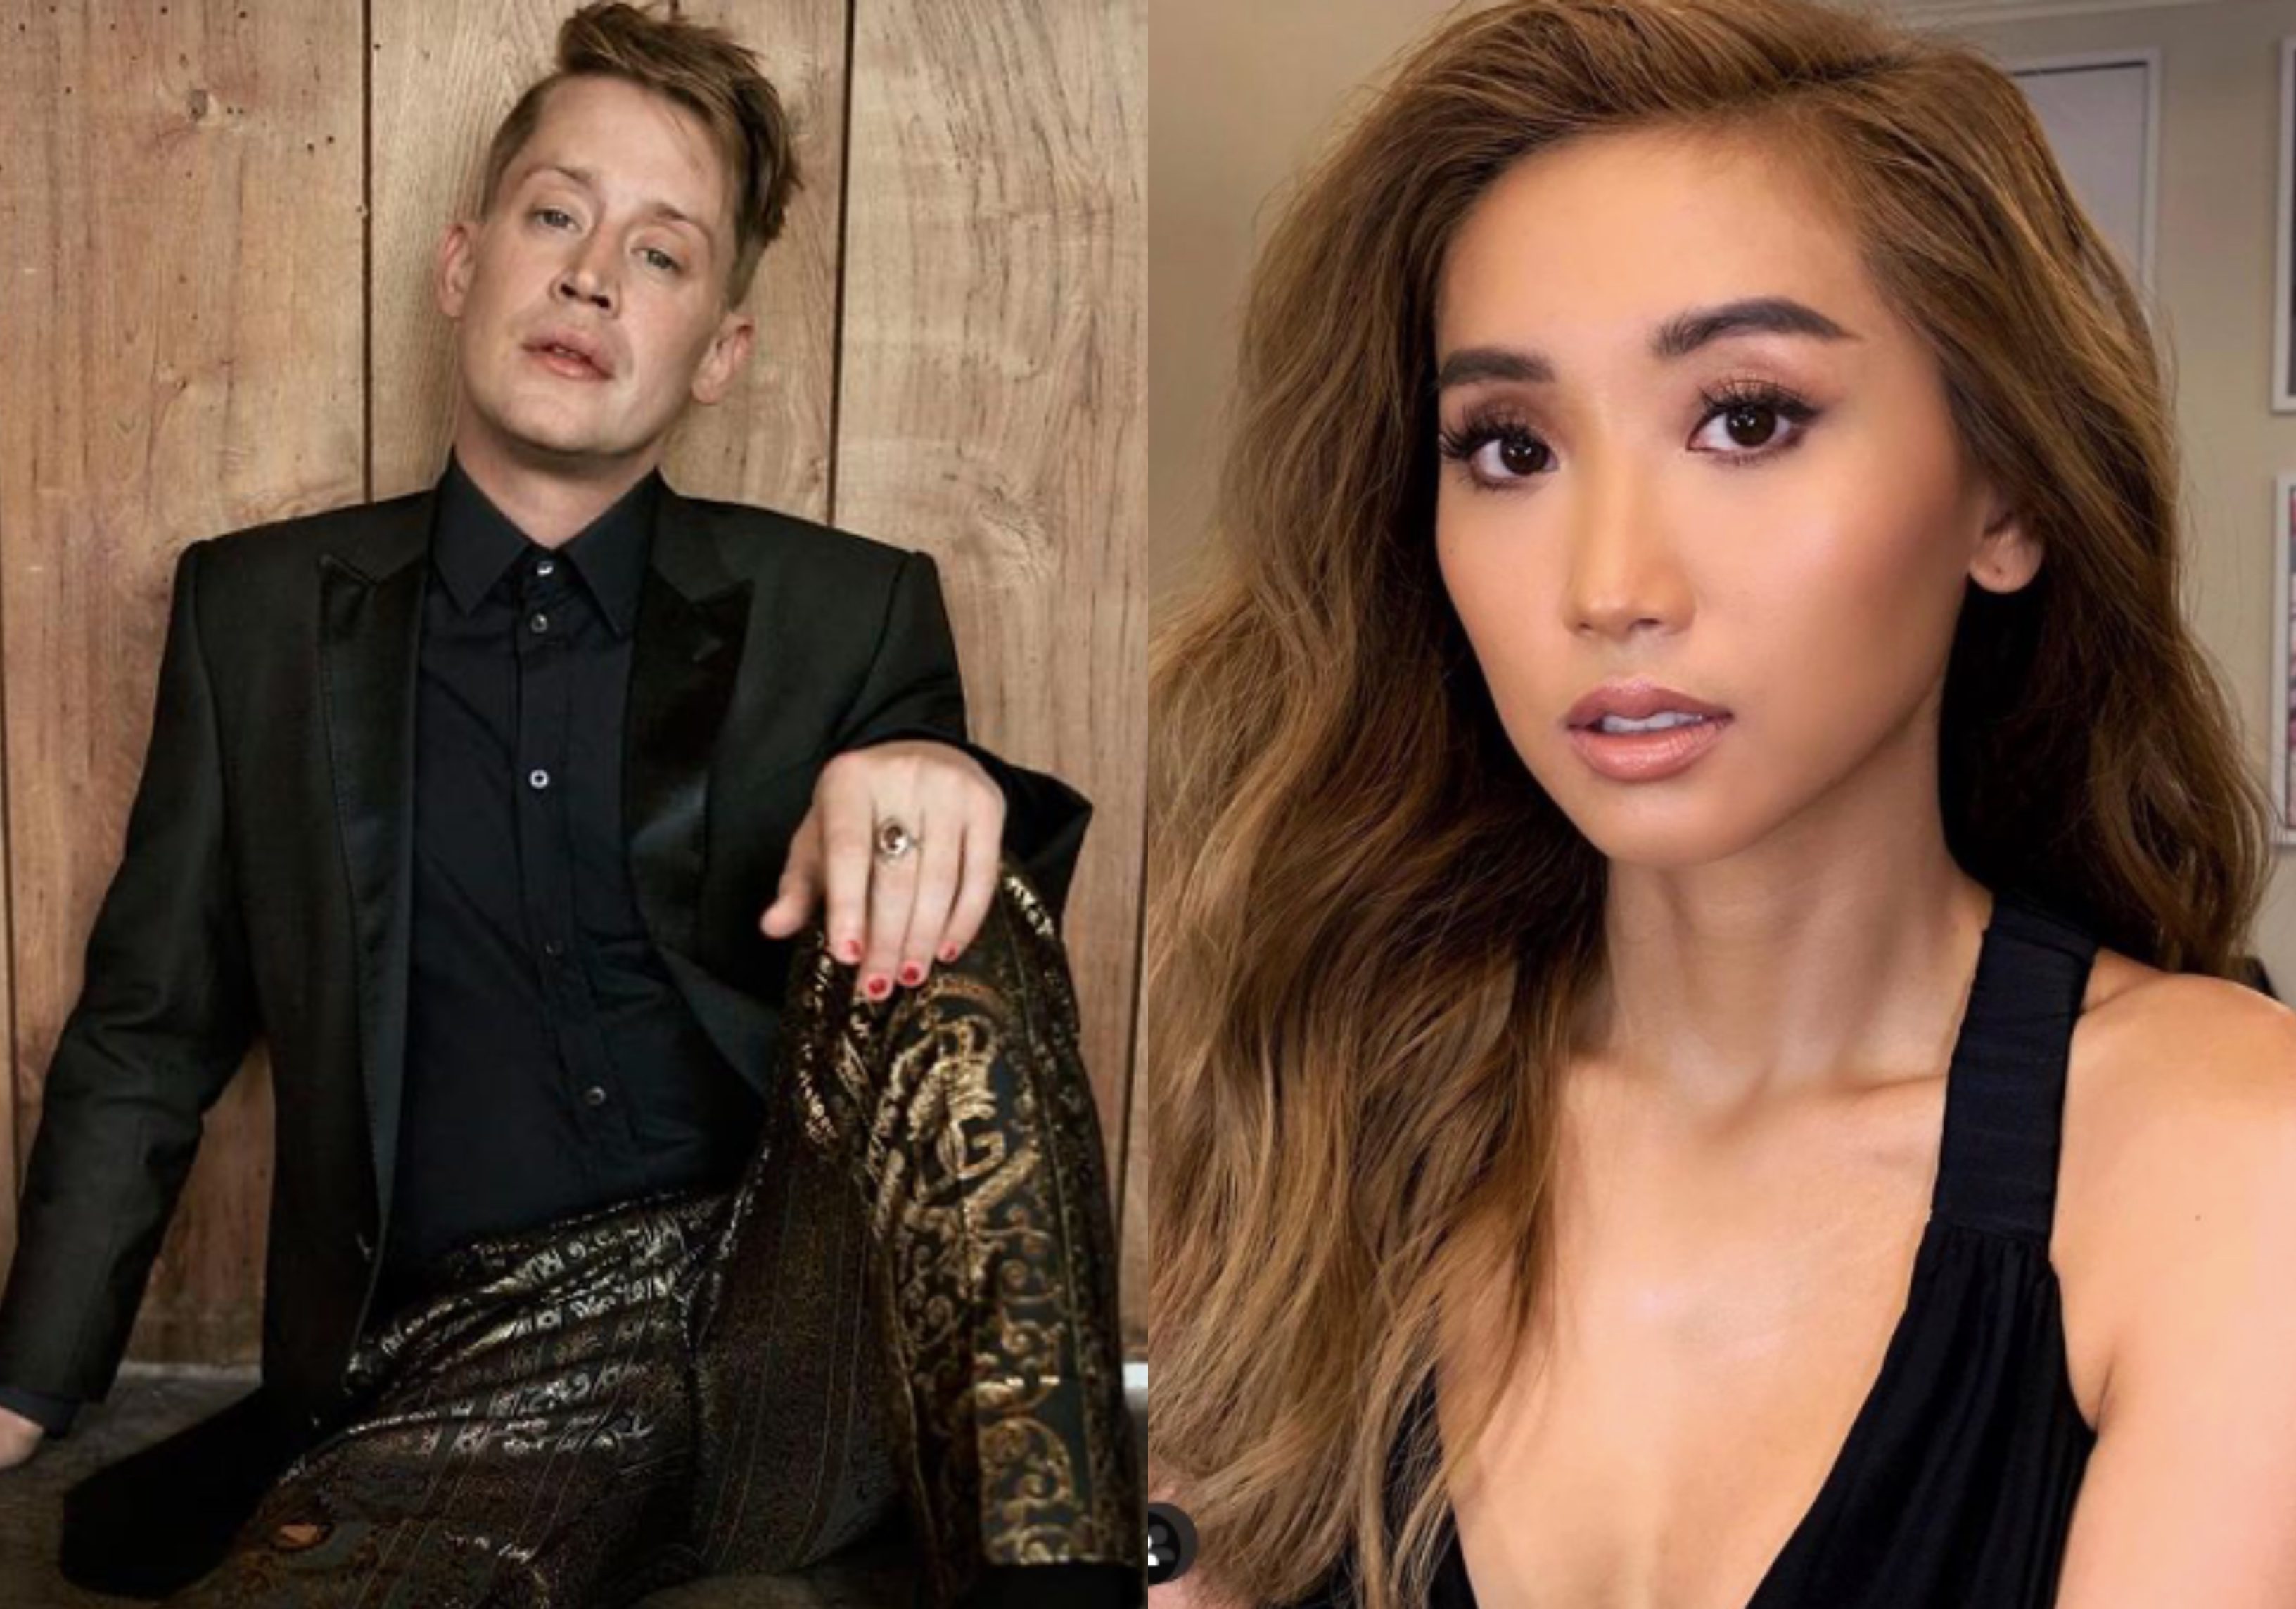 Macaulay Culkin and Brenda Song are engaged – reports